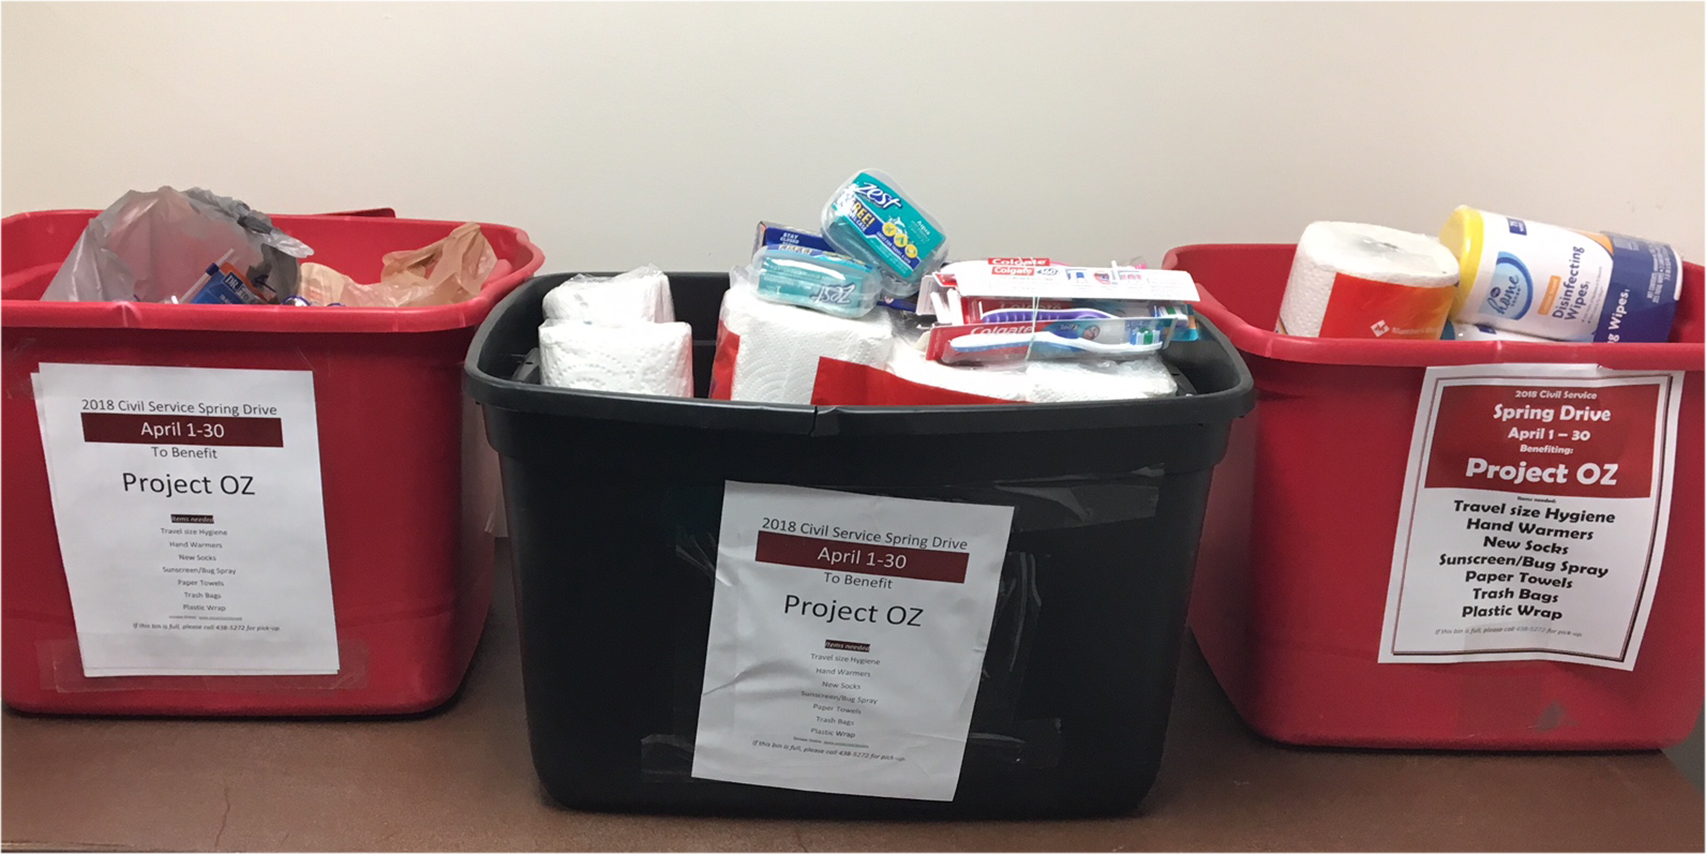 Three bins filled with toothbrushes, paper towels, soap and other items for teenagers in temporary housing.